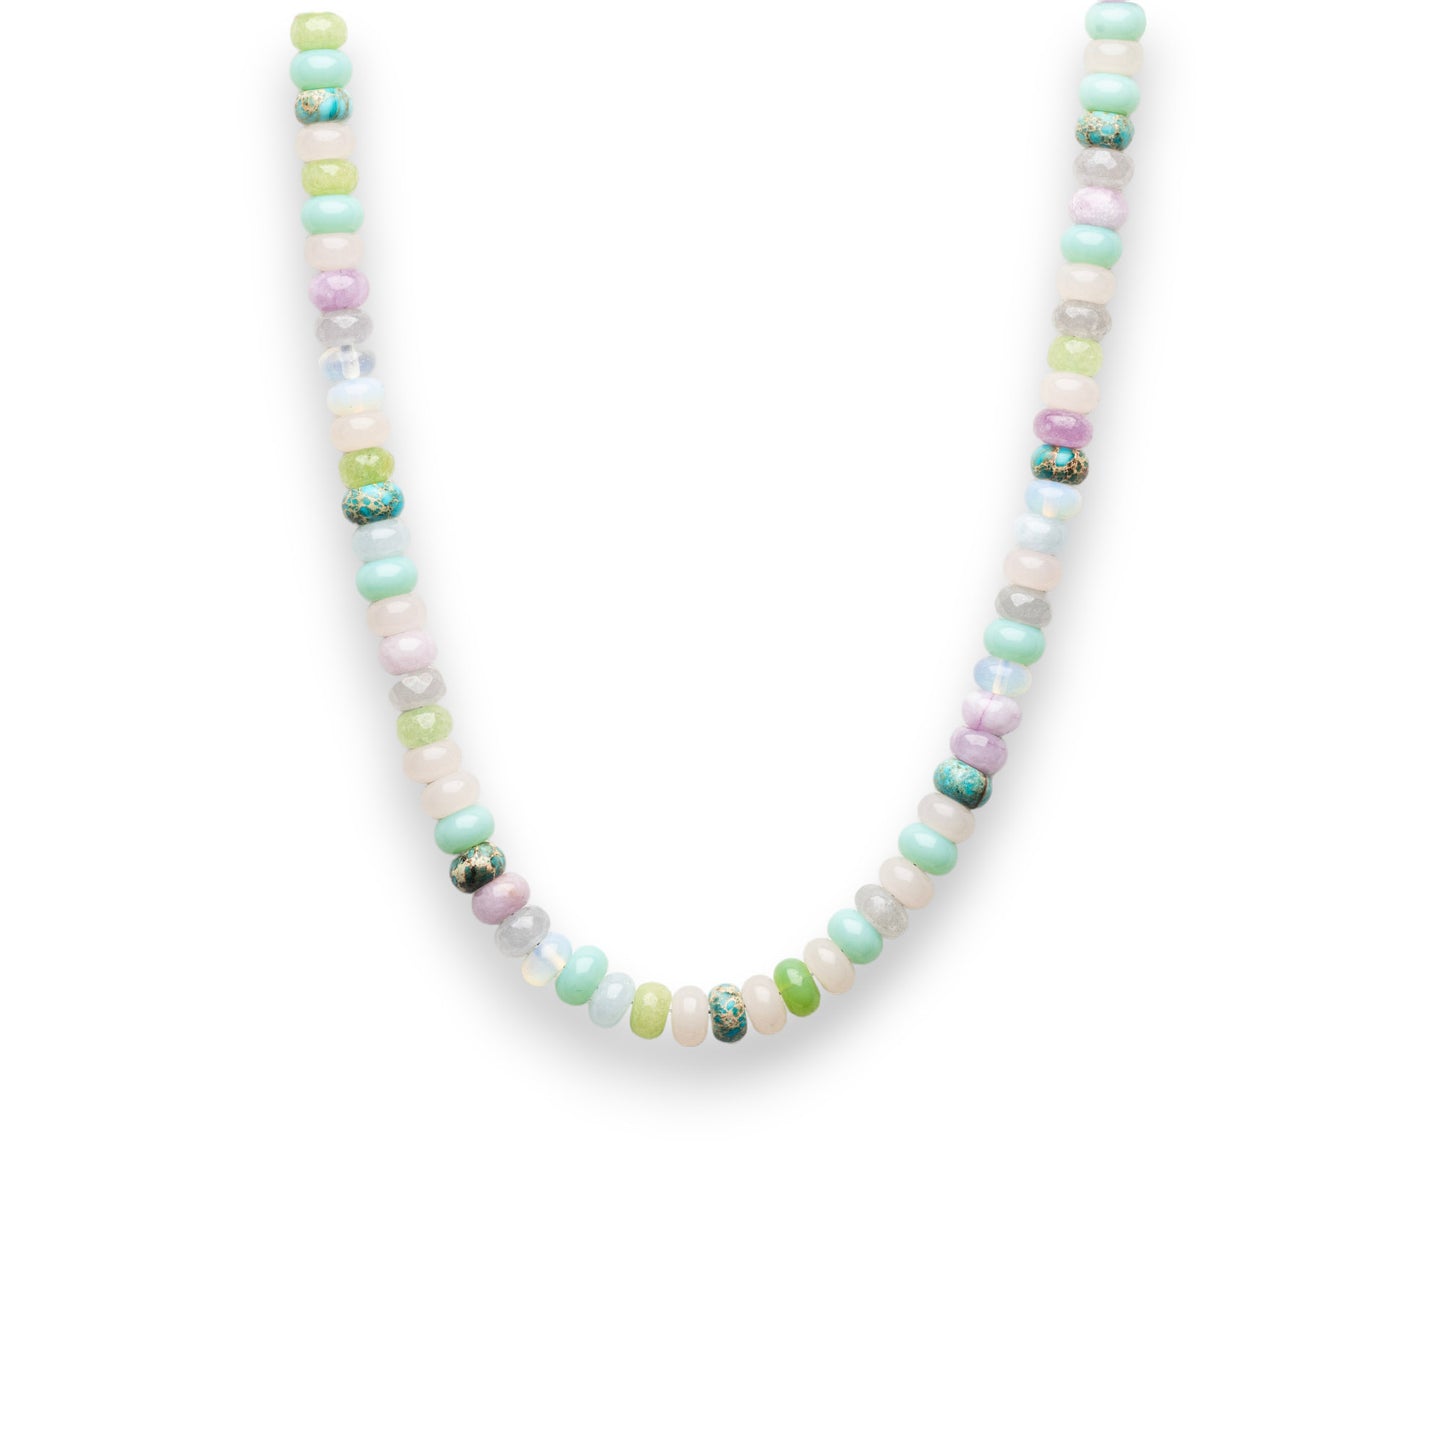 Pastel Mixed Rondelle Bead Necklace